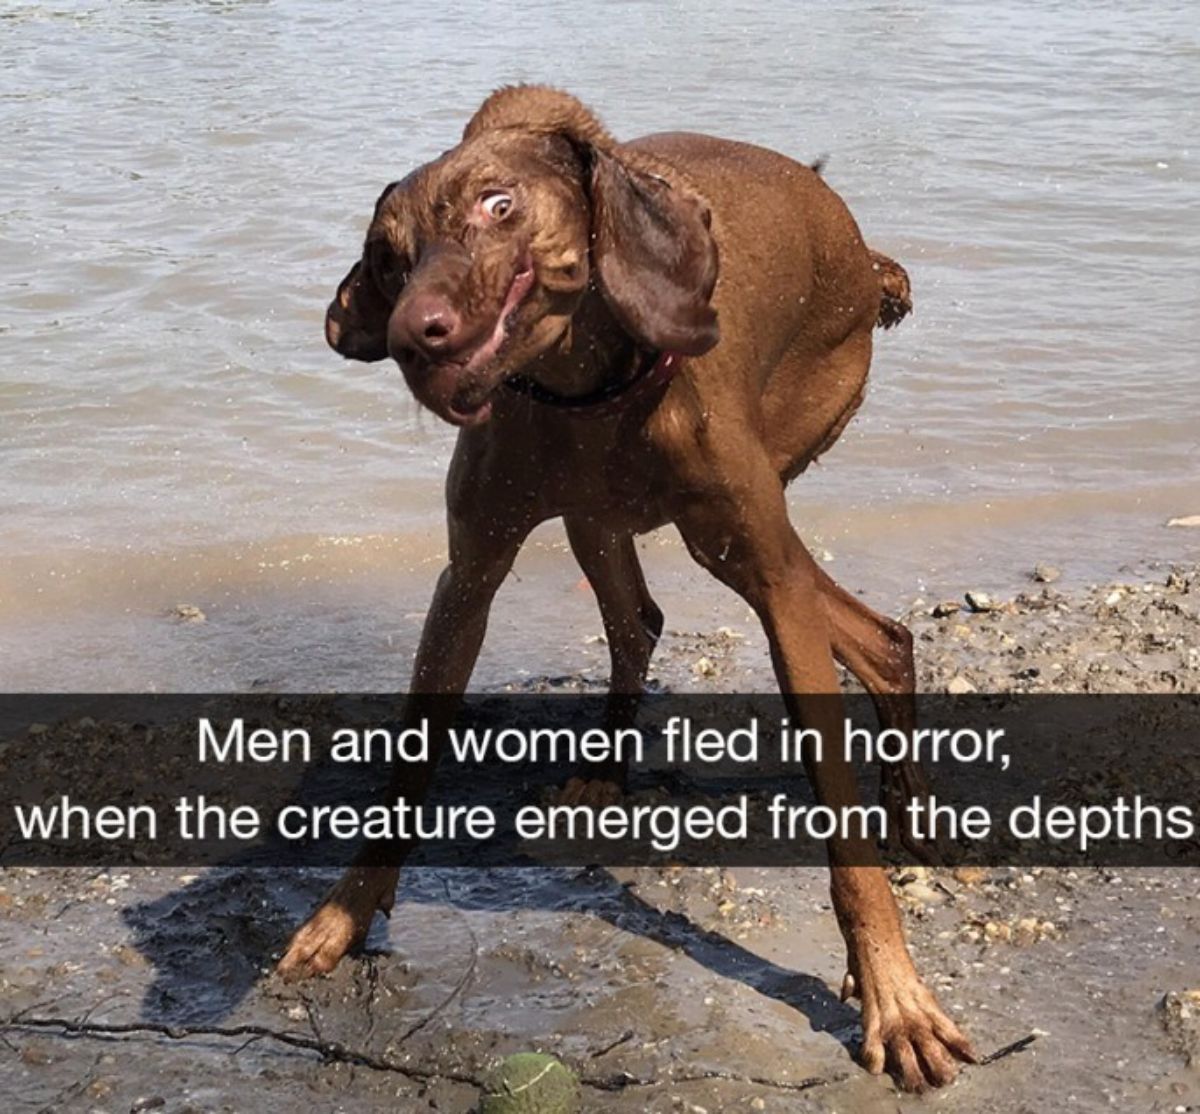 wet brown dog on a beach shaking itself off with the caption Men and women fled in terror when the creature emerged from the depths